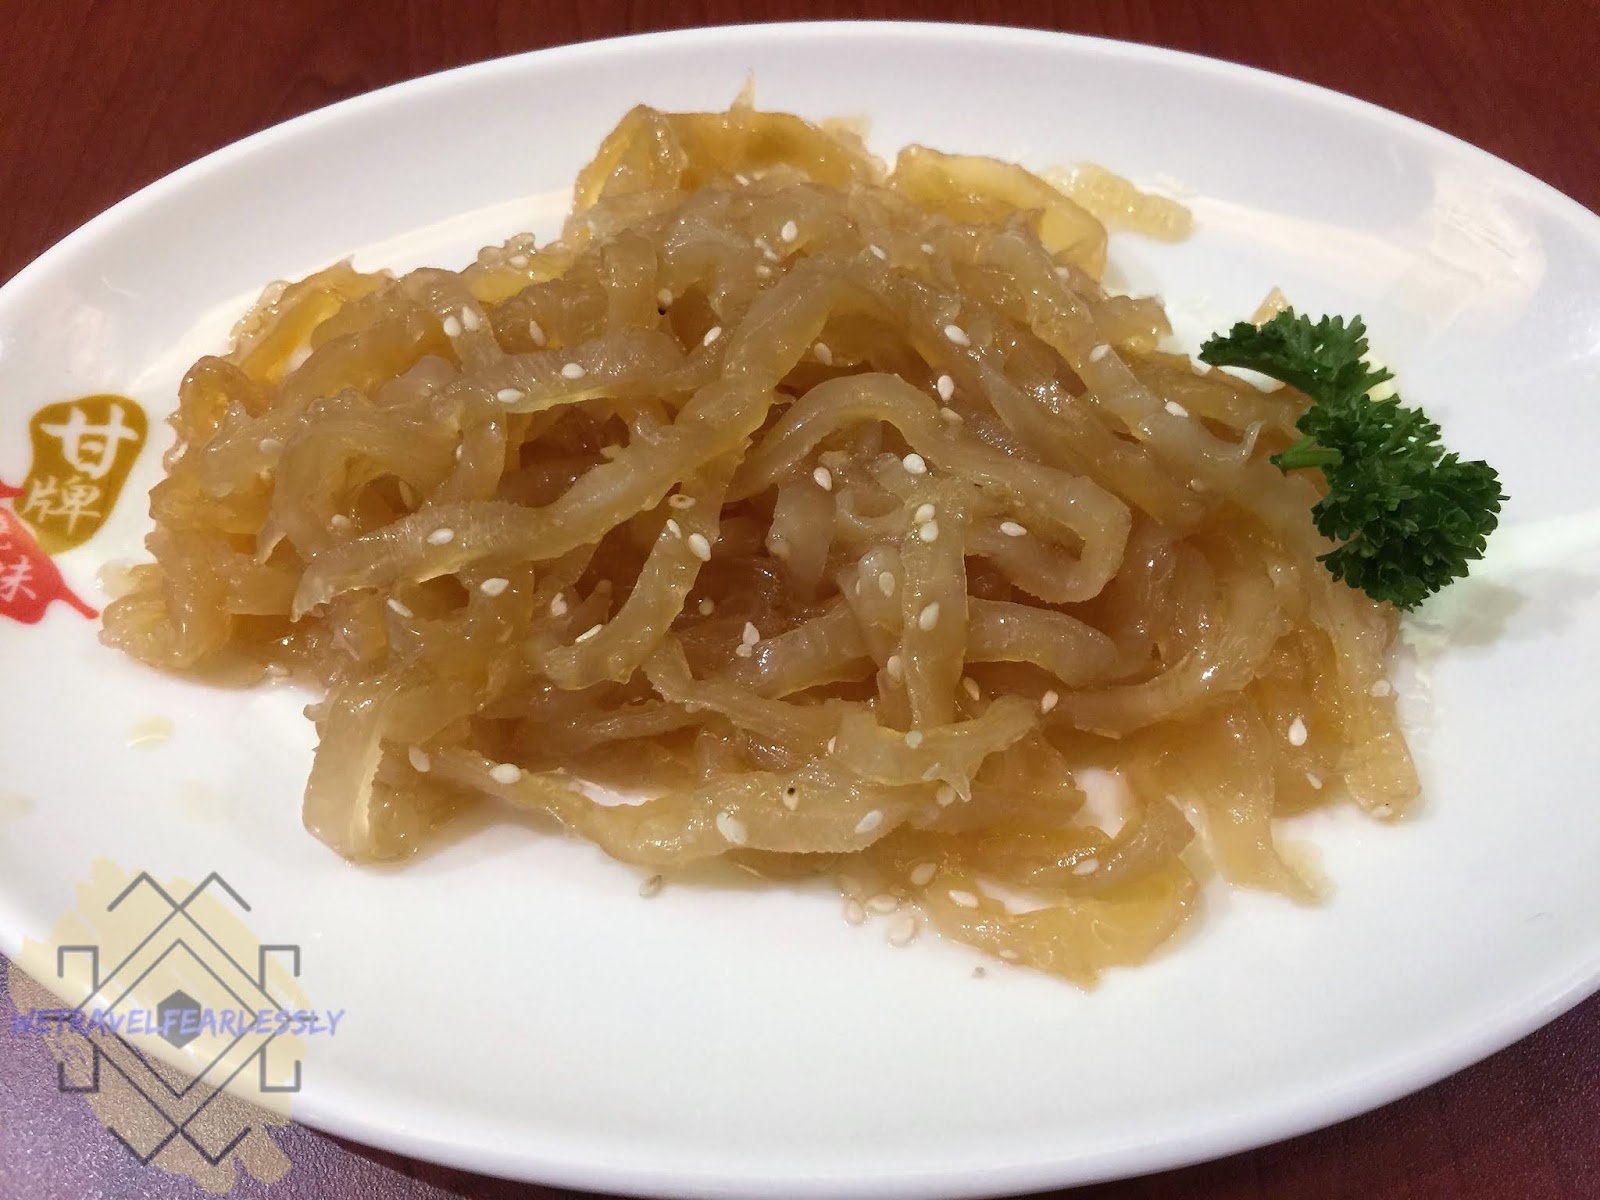 Kam's Roast in Megamall - Jellyfish with Sesame oil (PHP350)